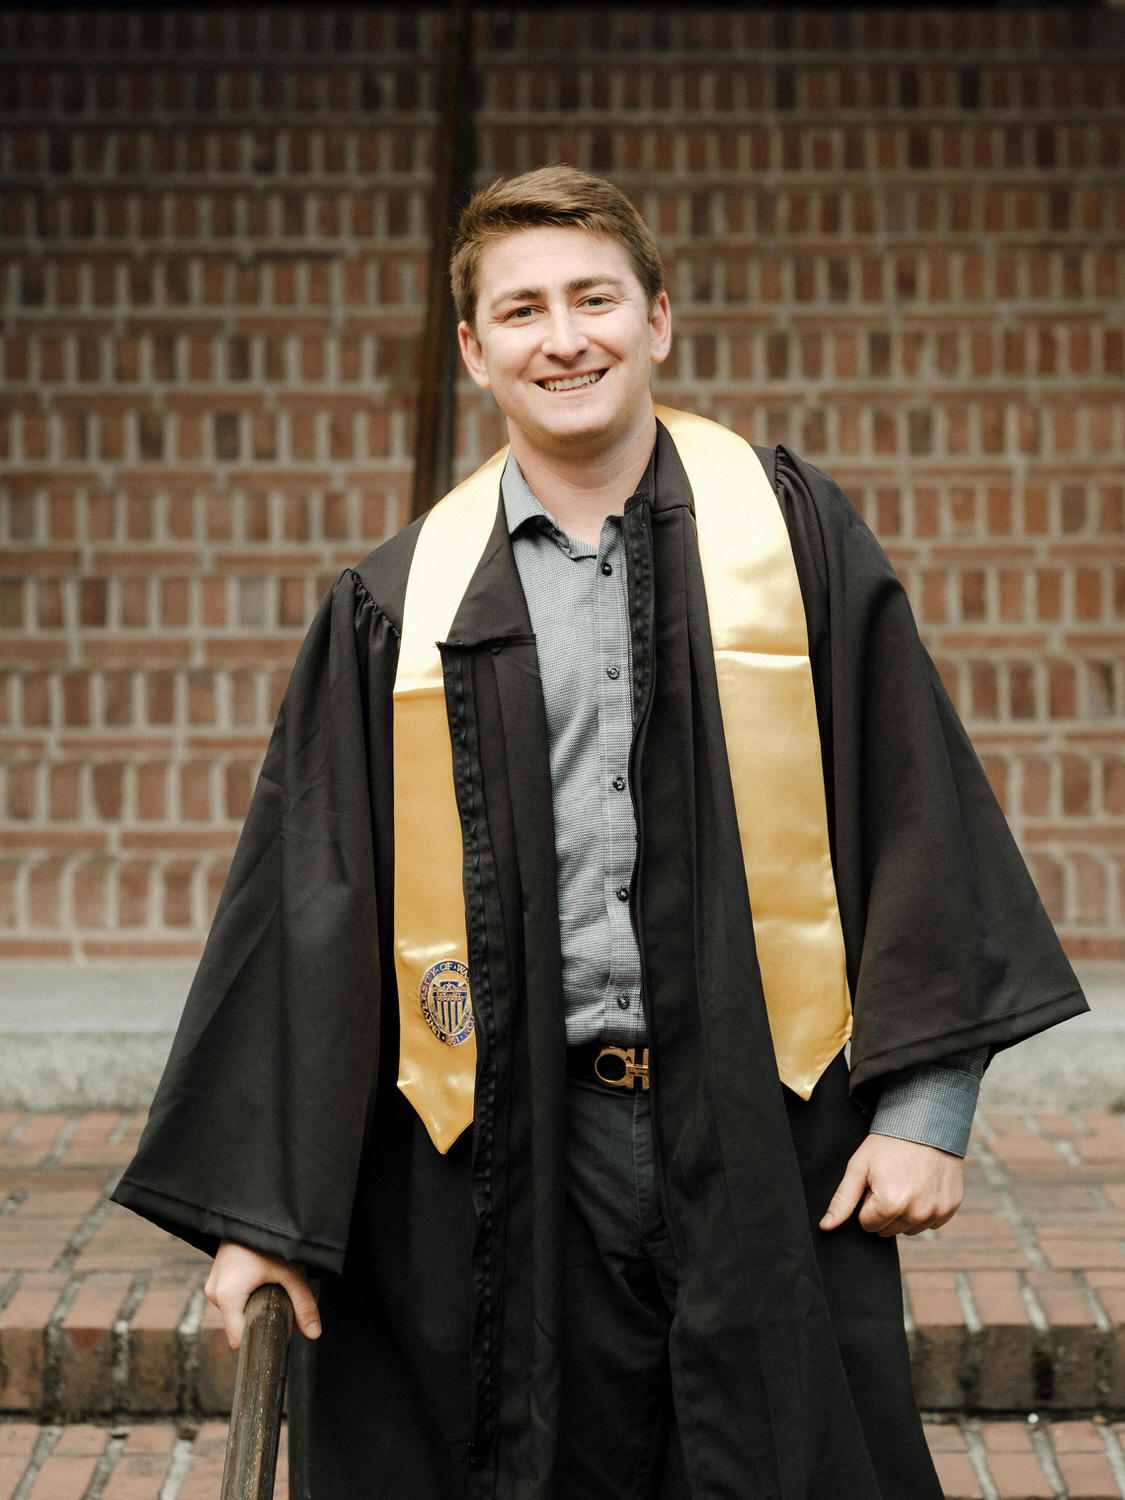 Portrait of UW graduate in his gown and yellow sash